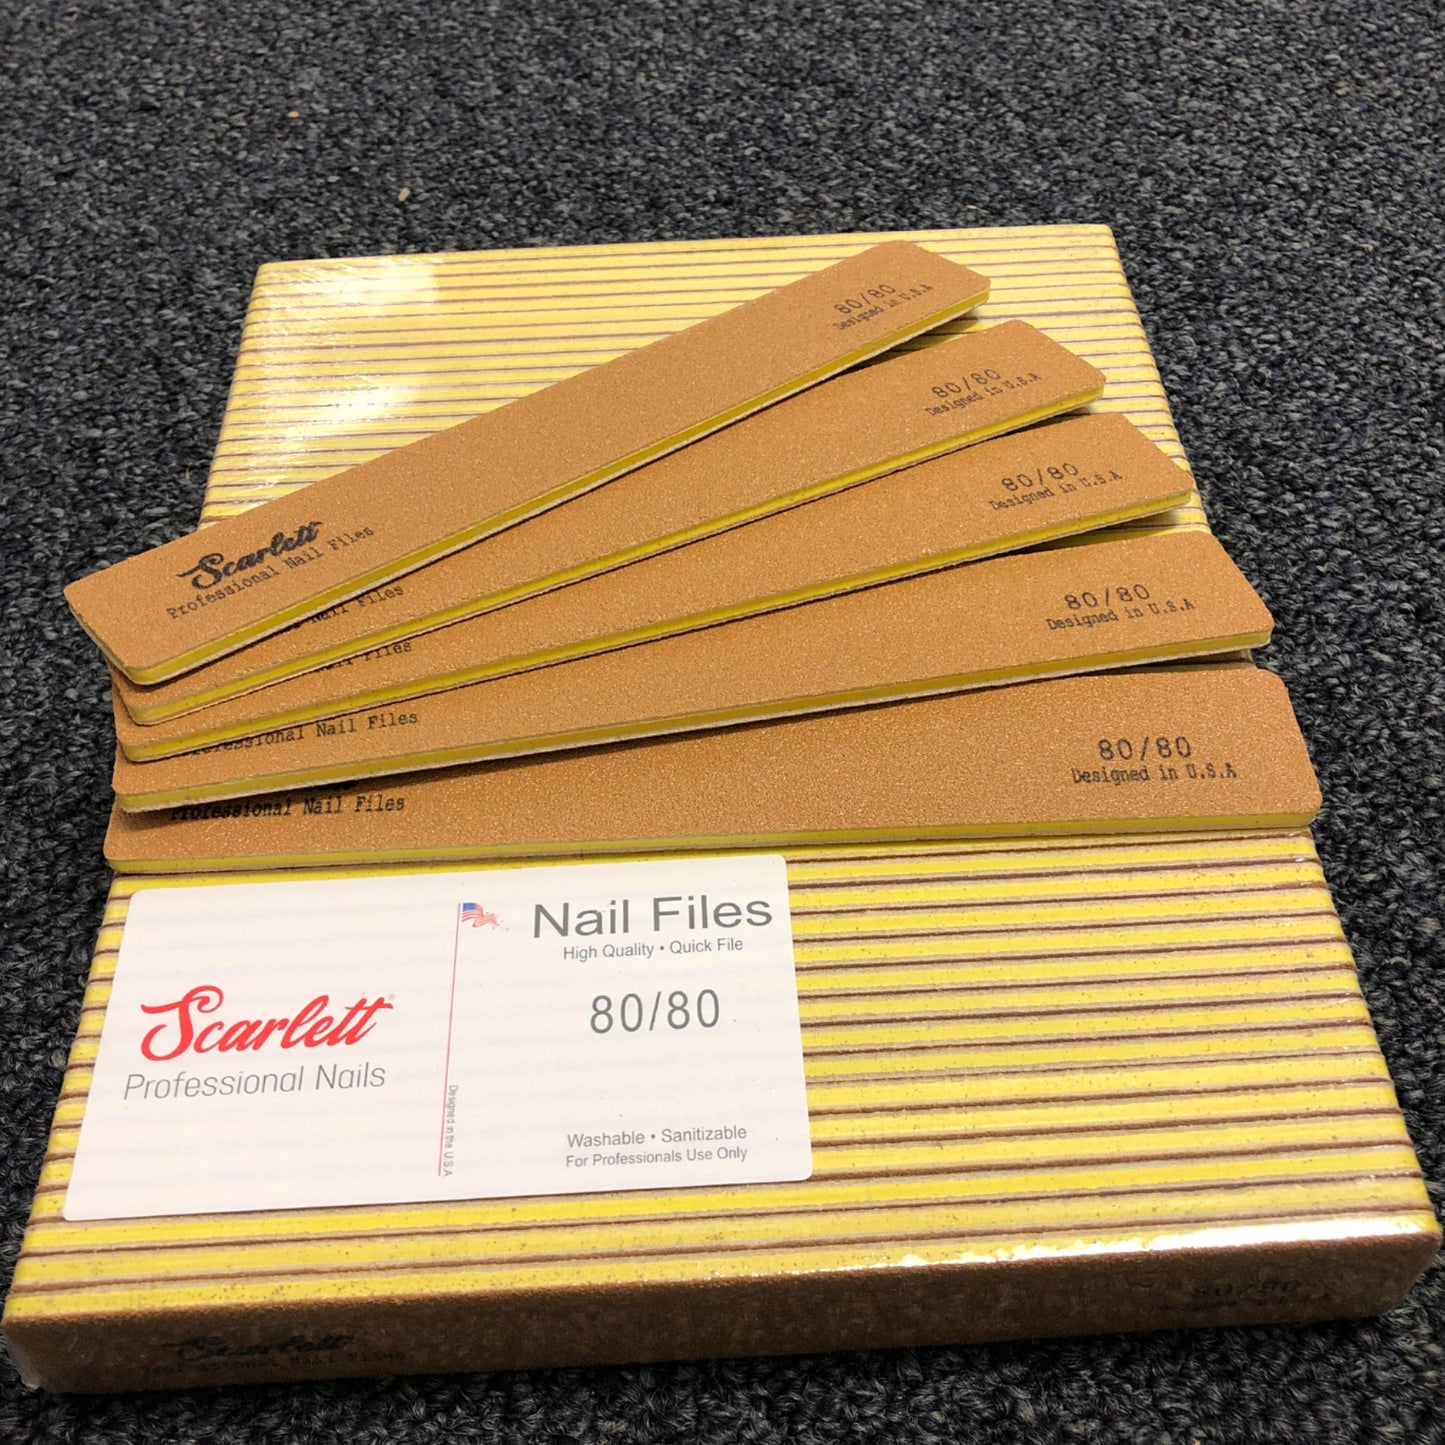 Gold Nail Files is made of supper premium, washable, sharp and long lasting abrasive Japanese Origin.